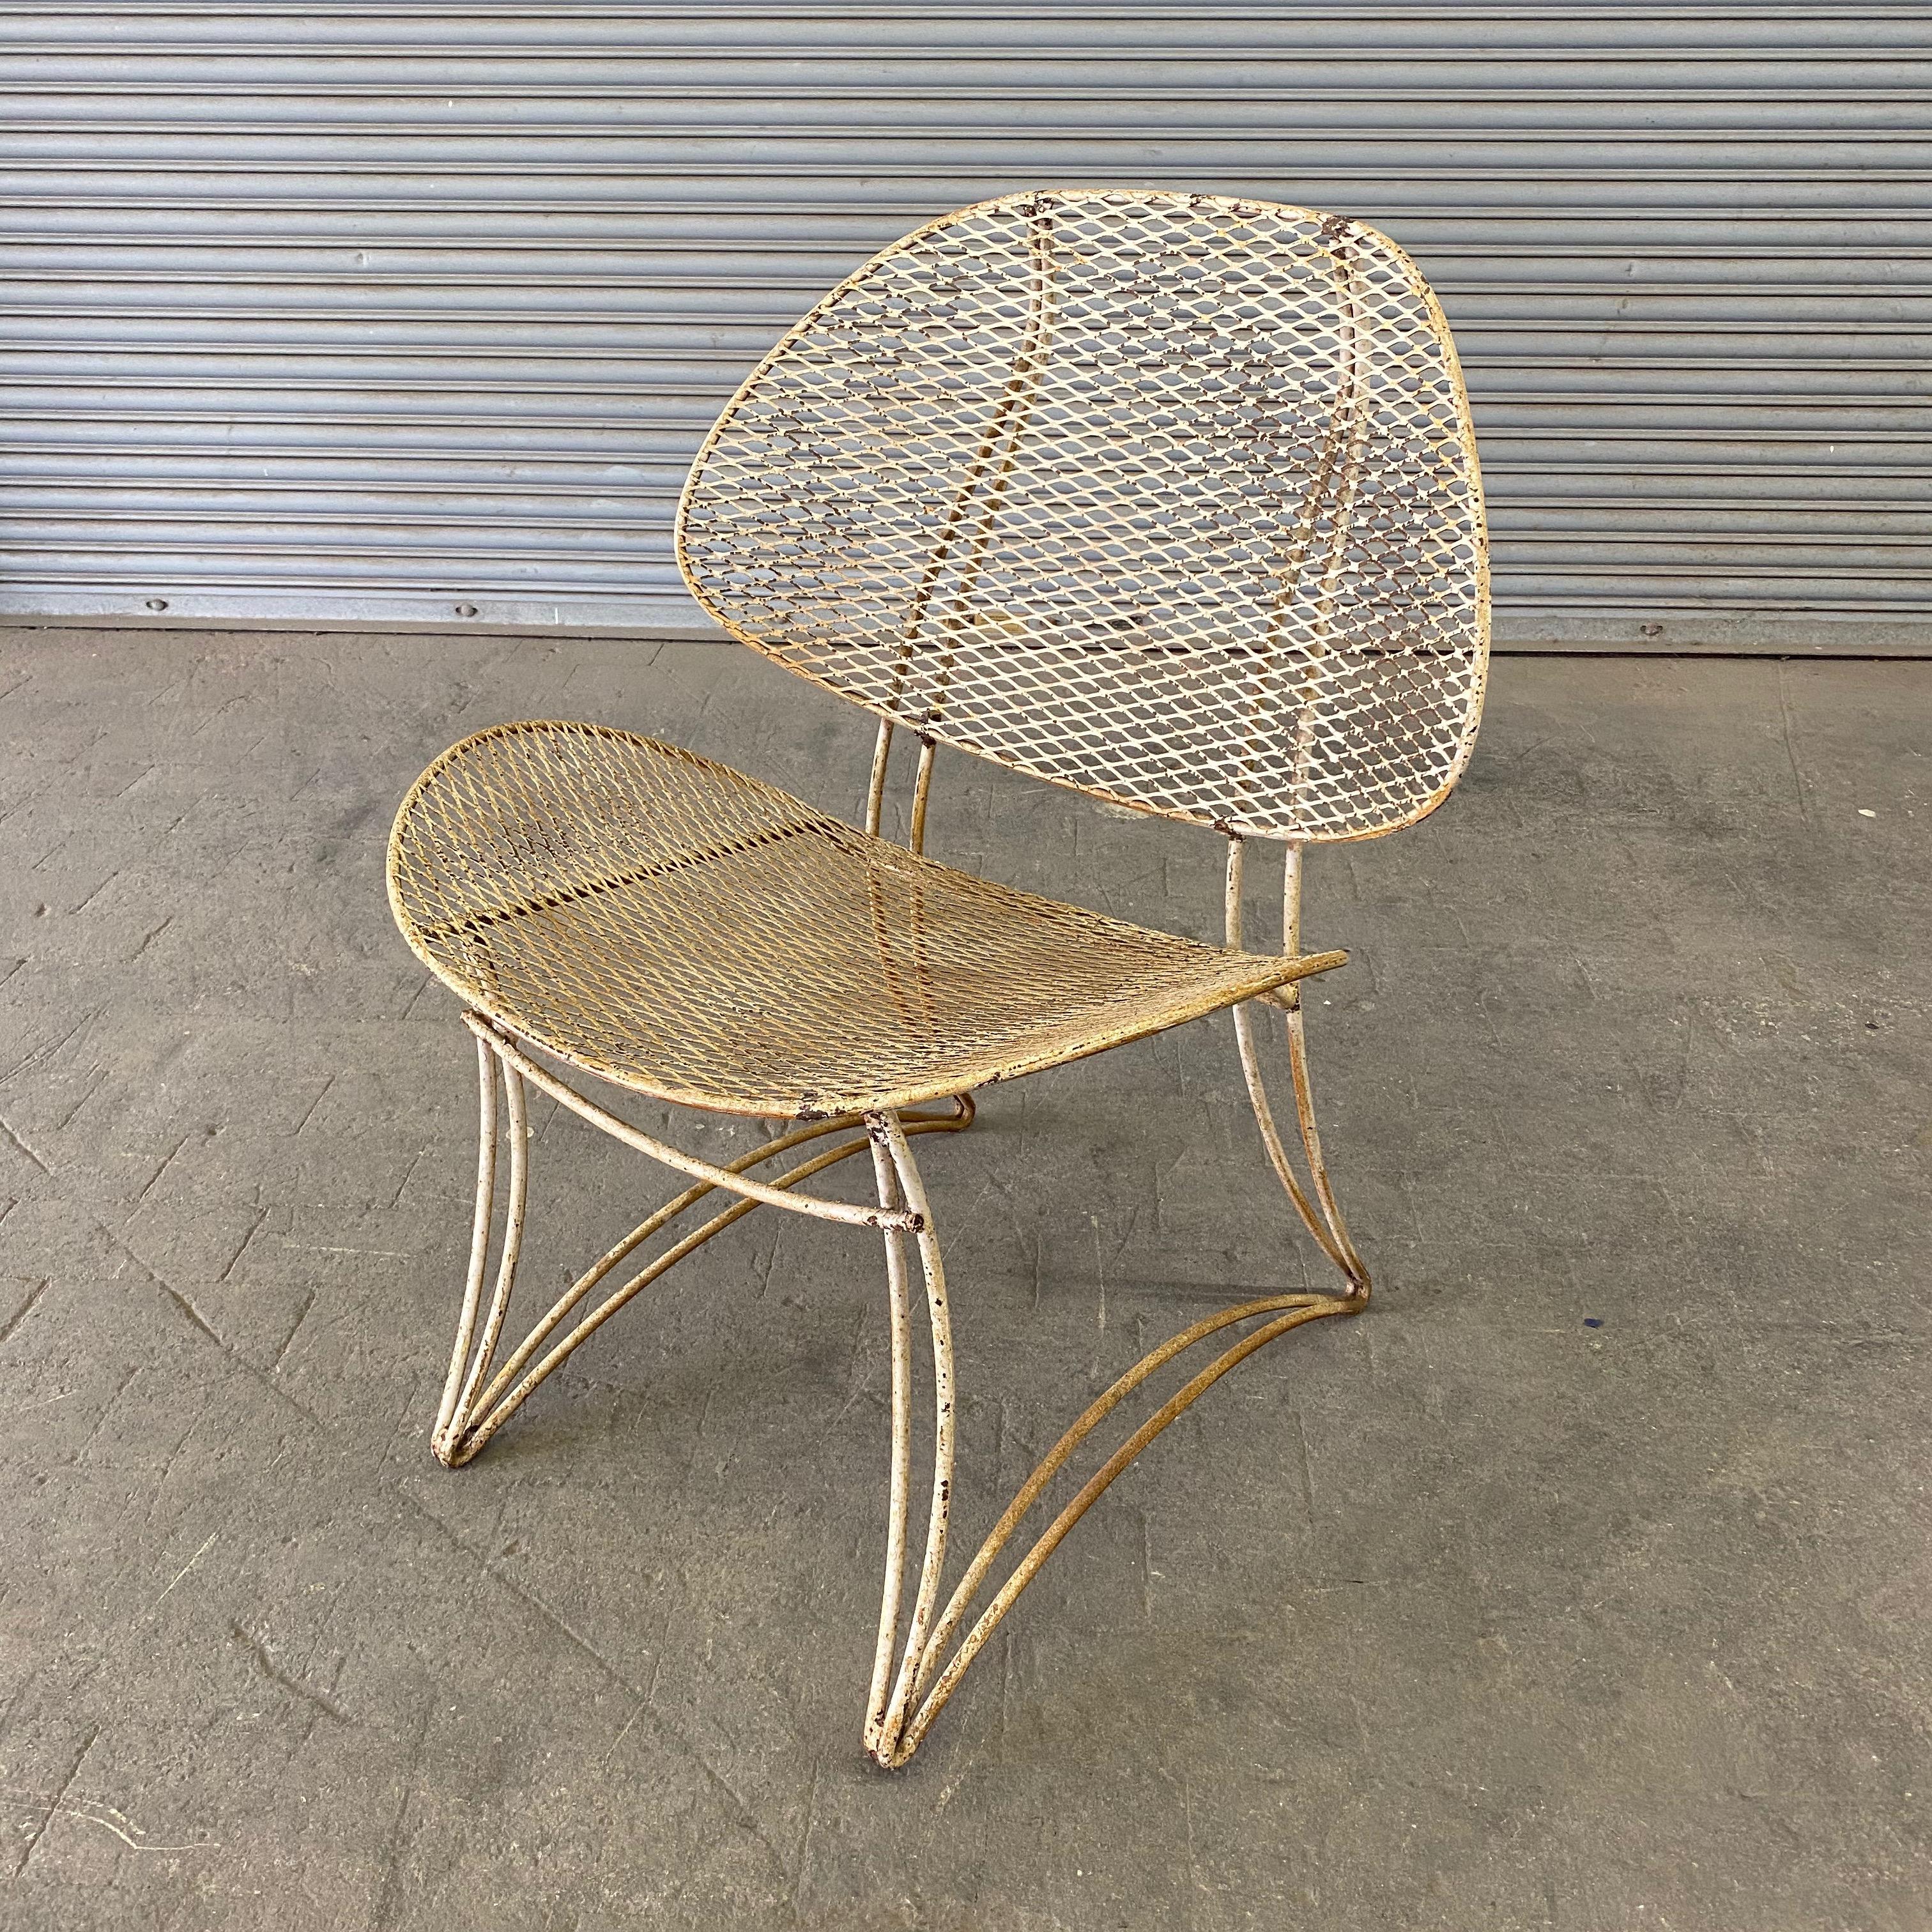 1960s modern garden chair made of iron with original oxidized white paint. Distressed paint finish.
      